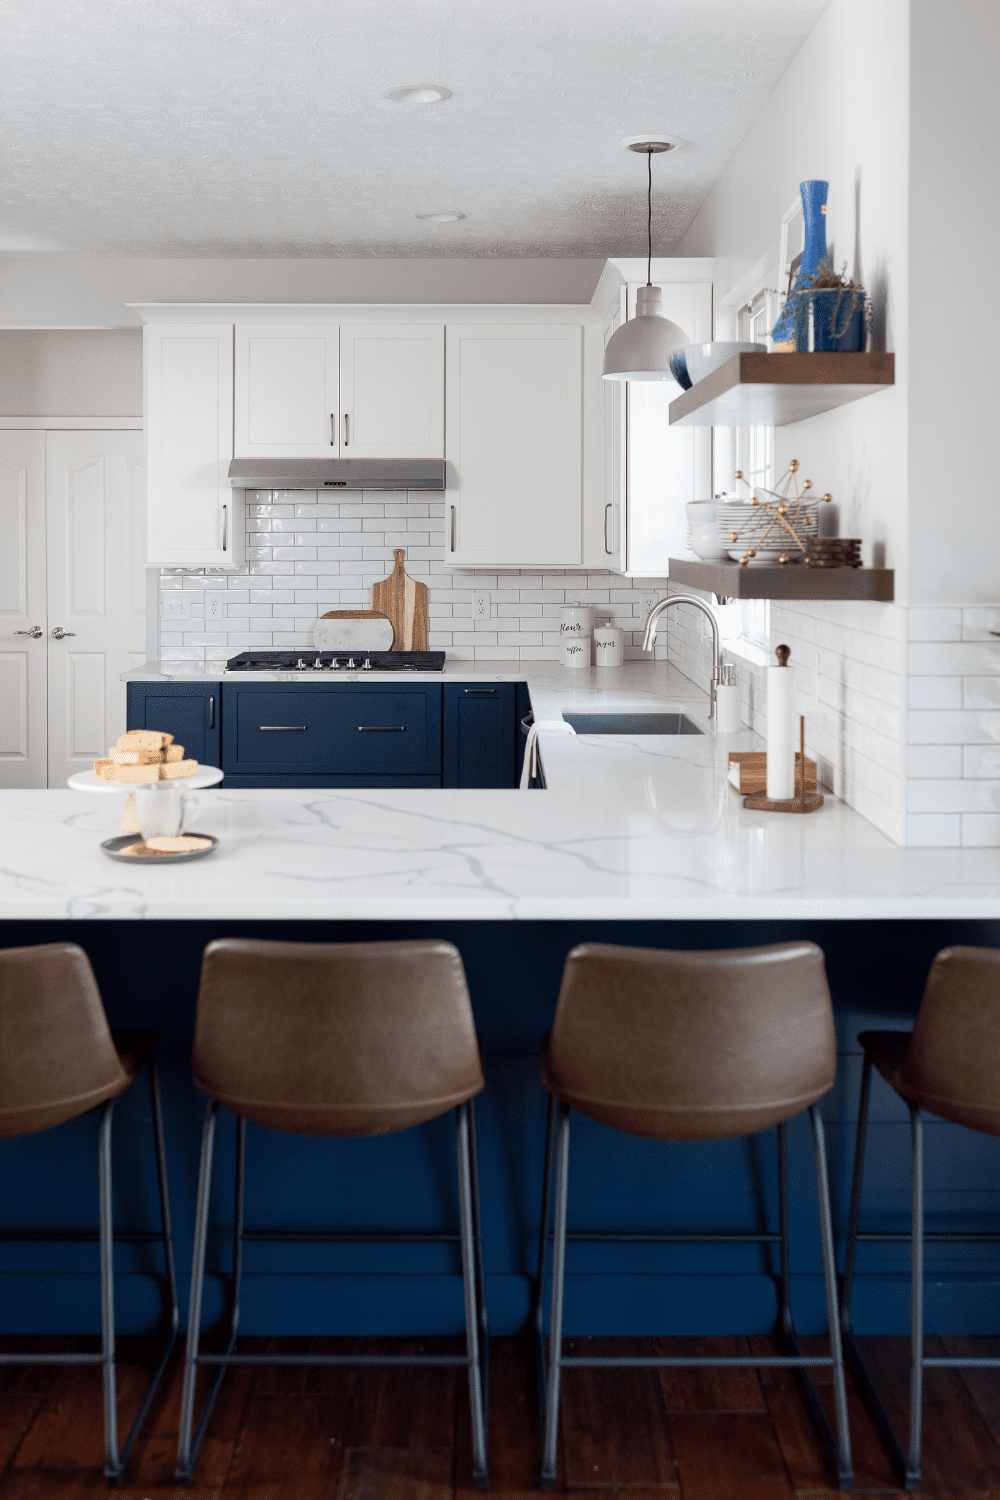 Nicholas Design Build | A white kitchen with blue cabinets and brown stools.